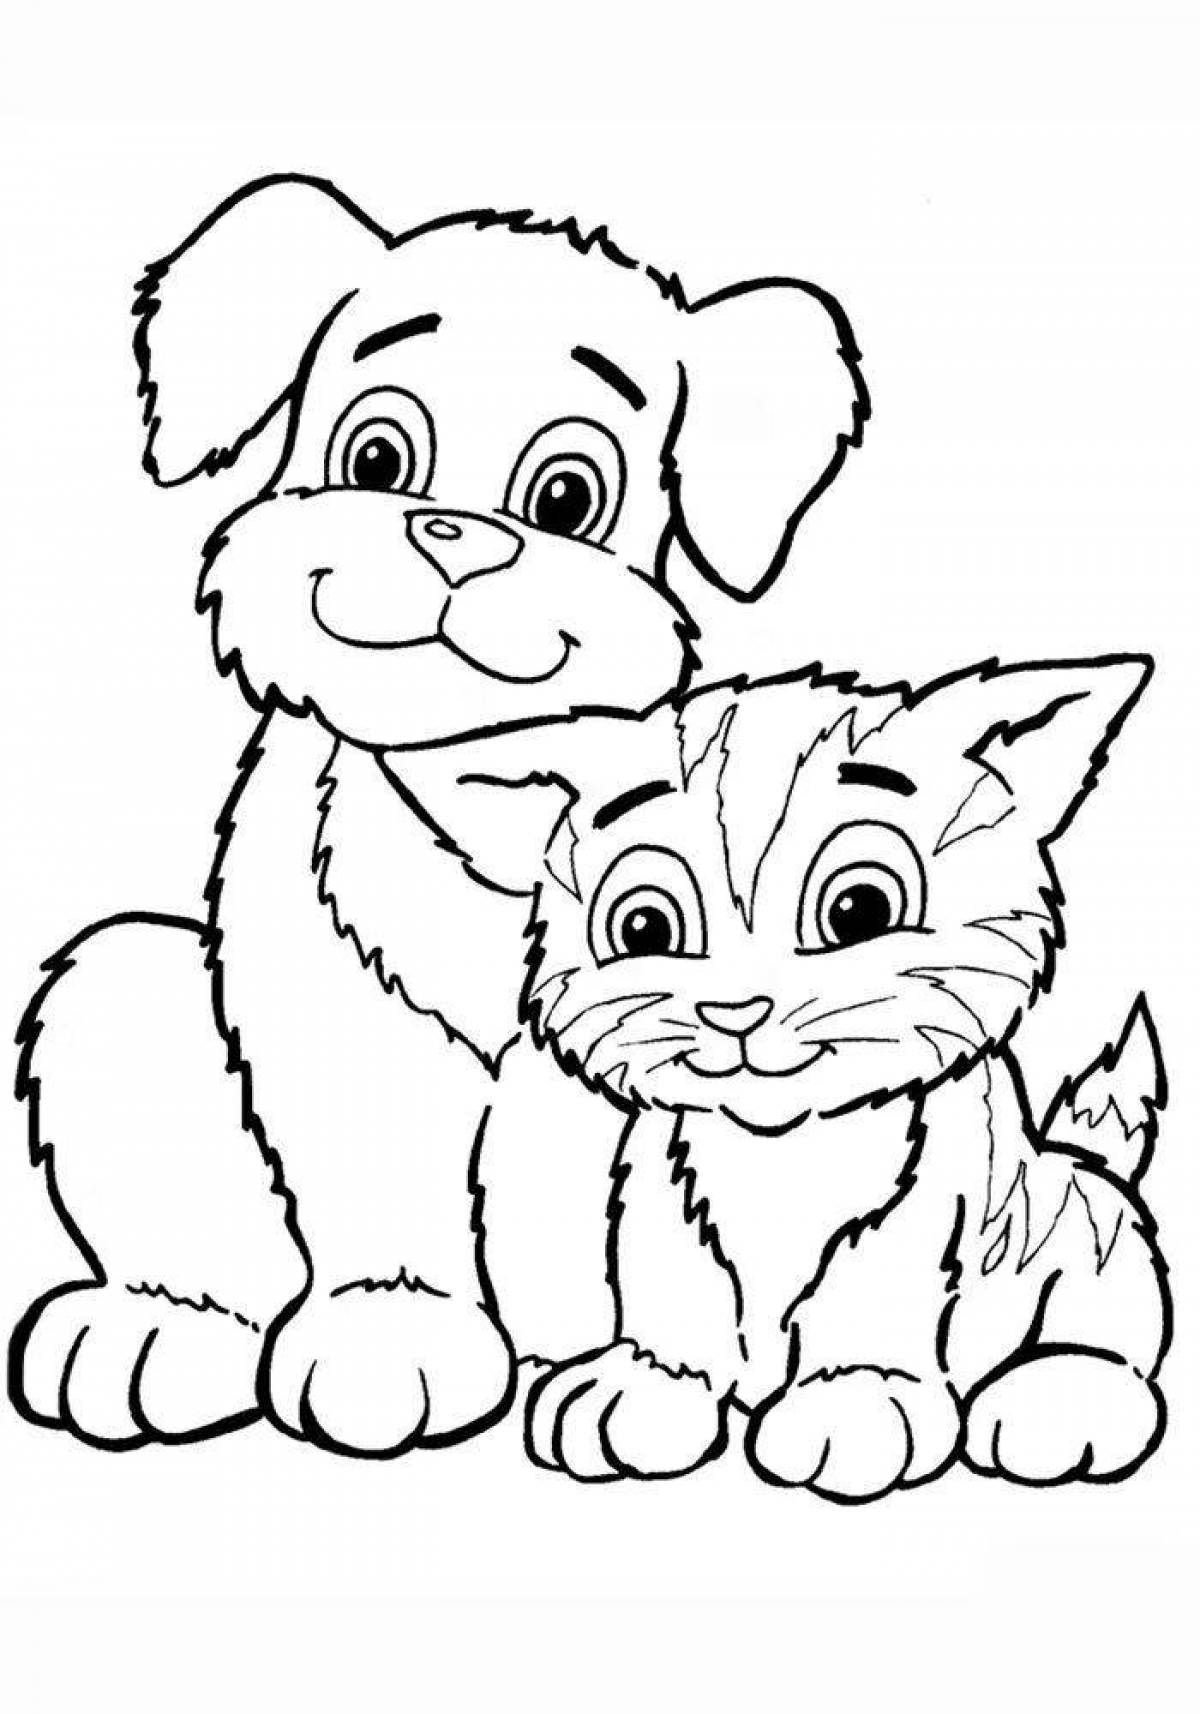 Cat and dog #4